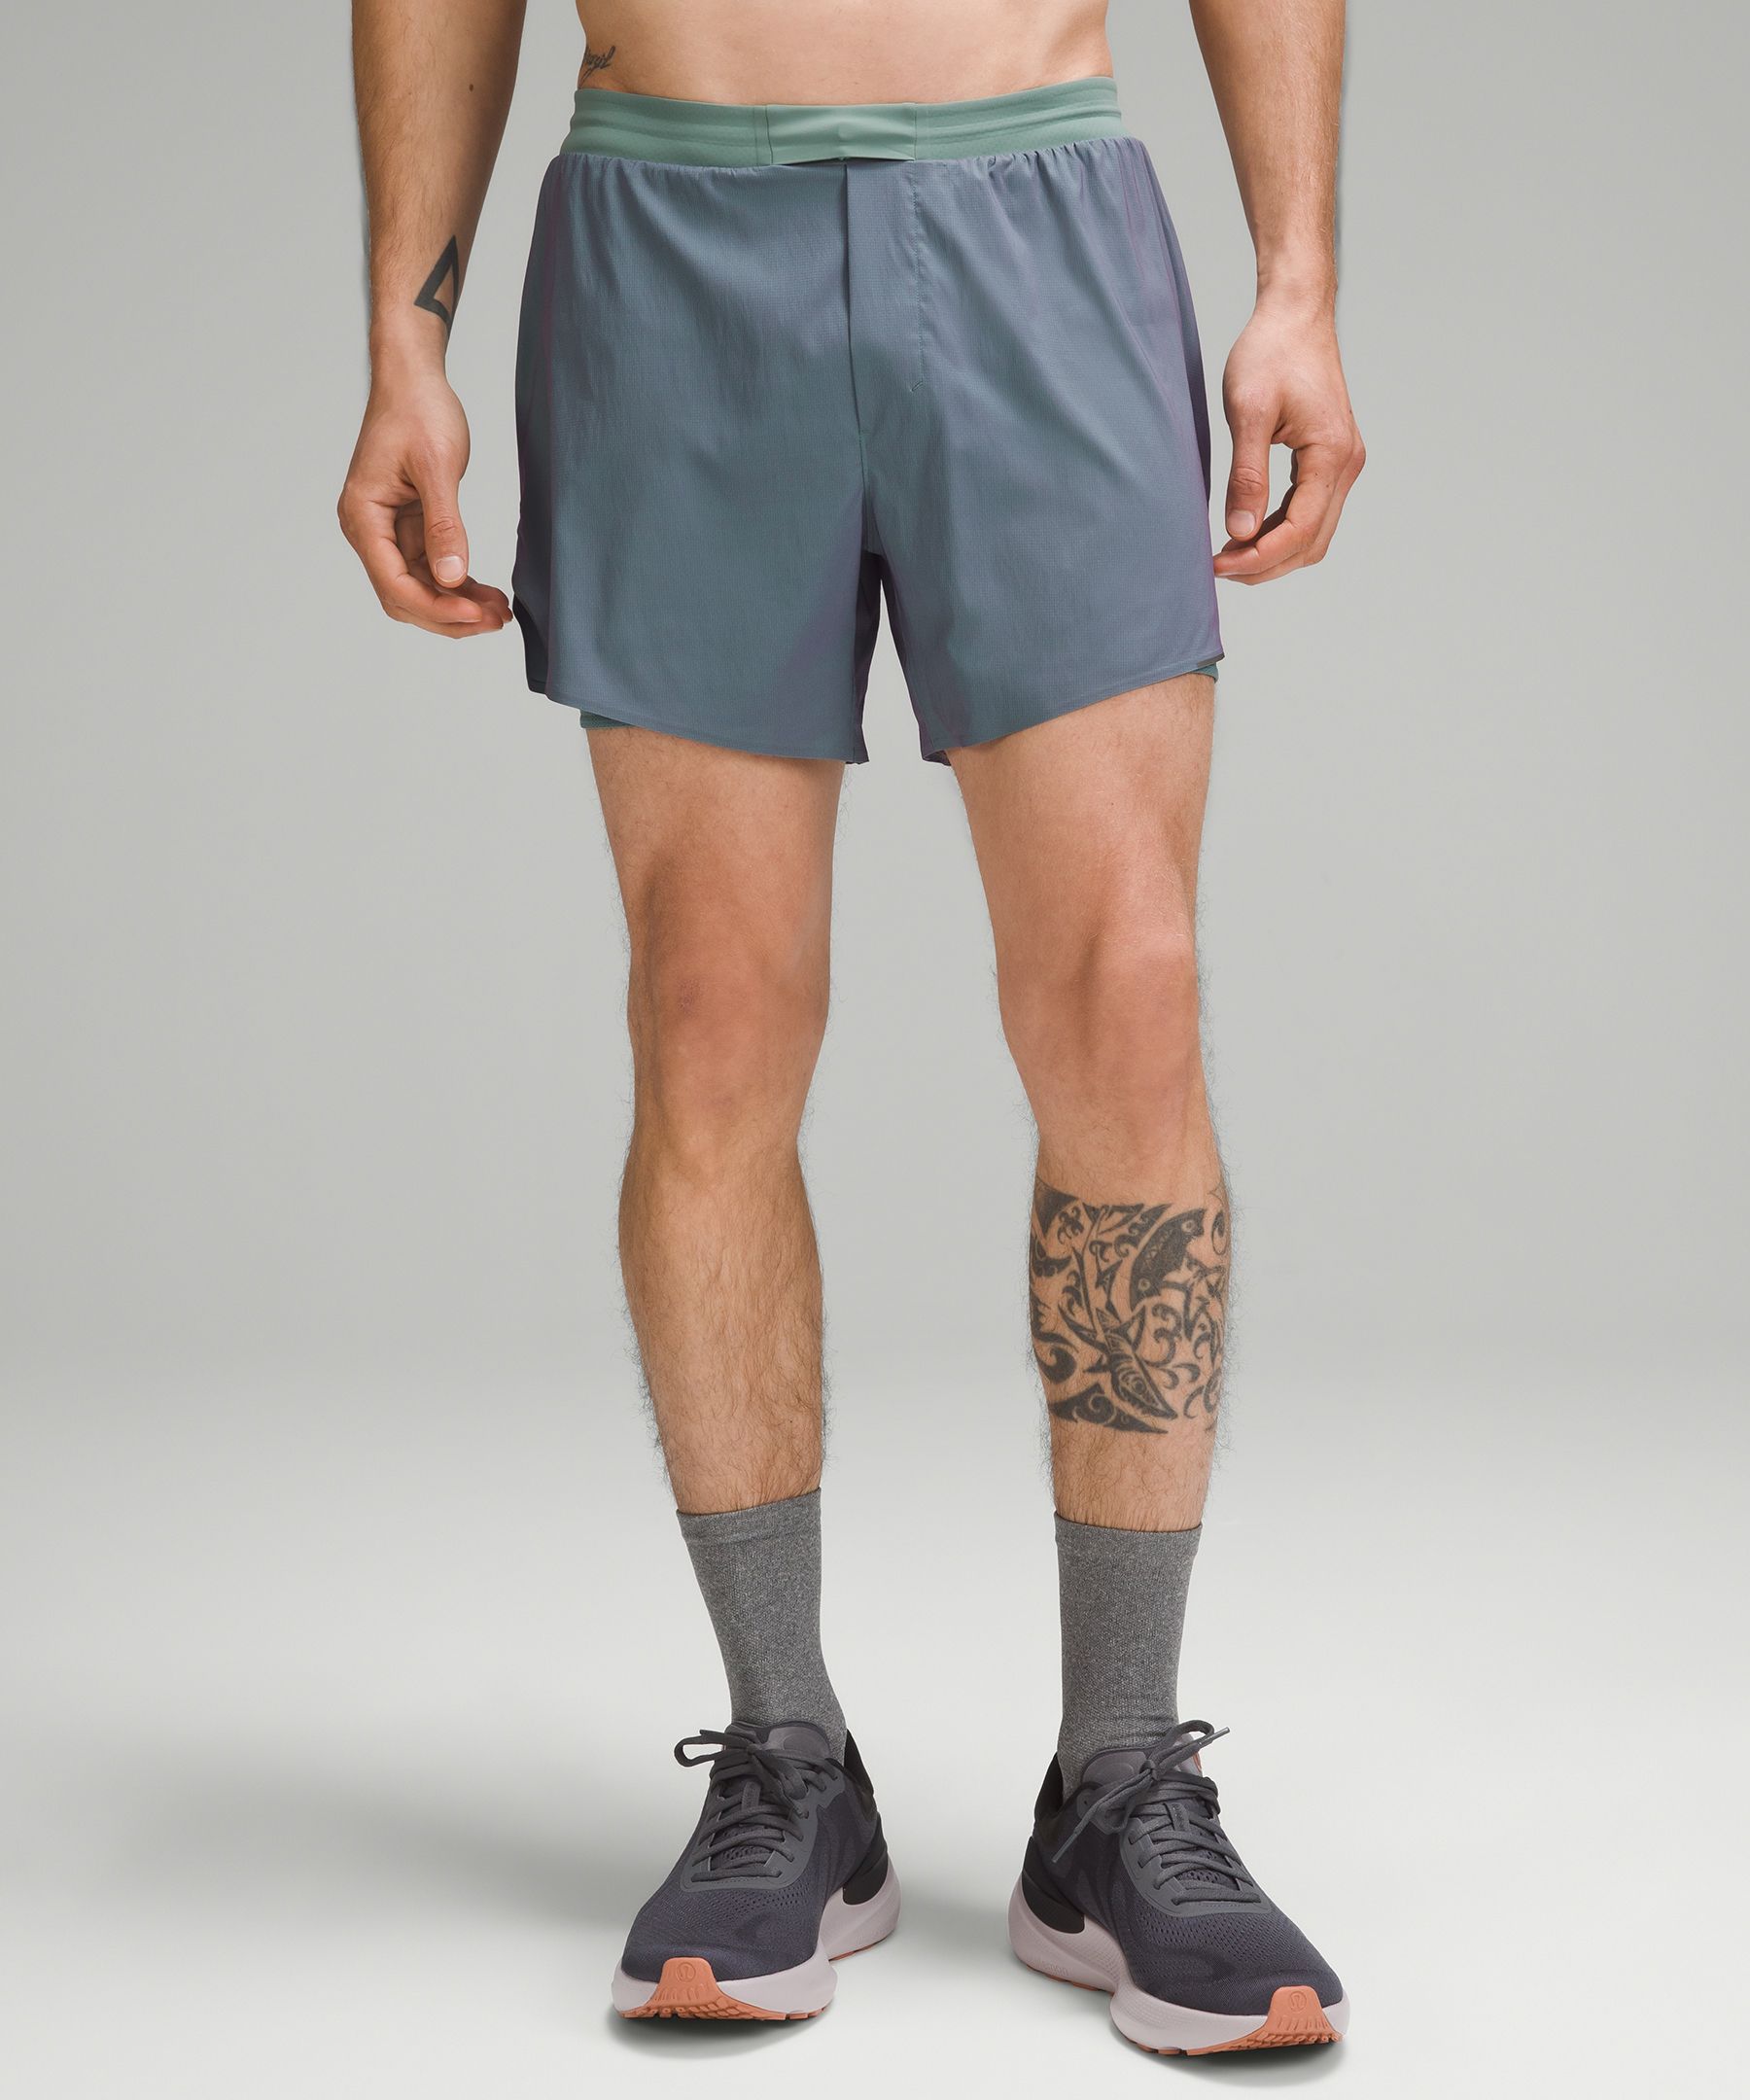 Fast and Free Lined Short 5 *Iridescent, Men's Shorts